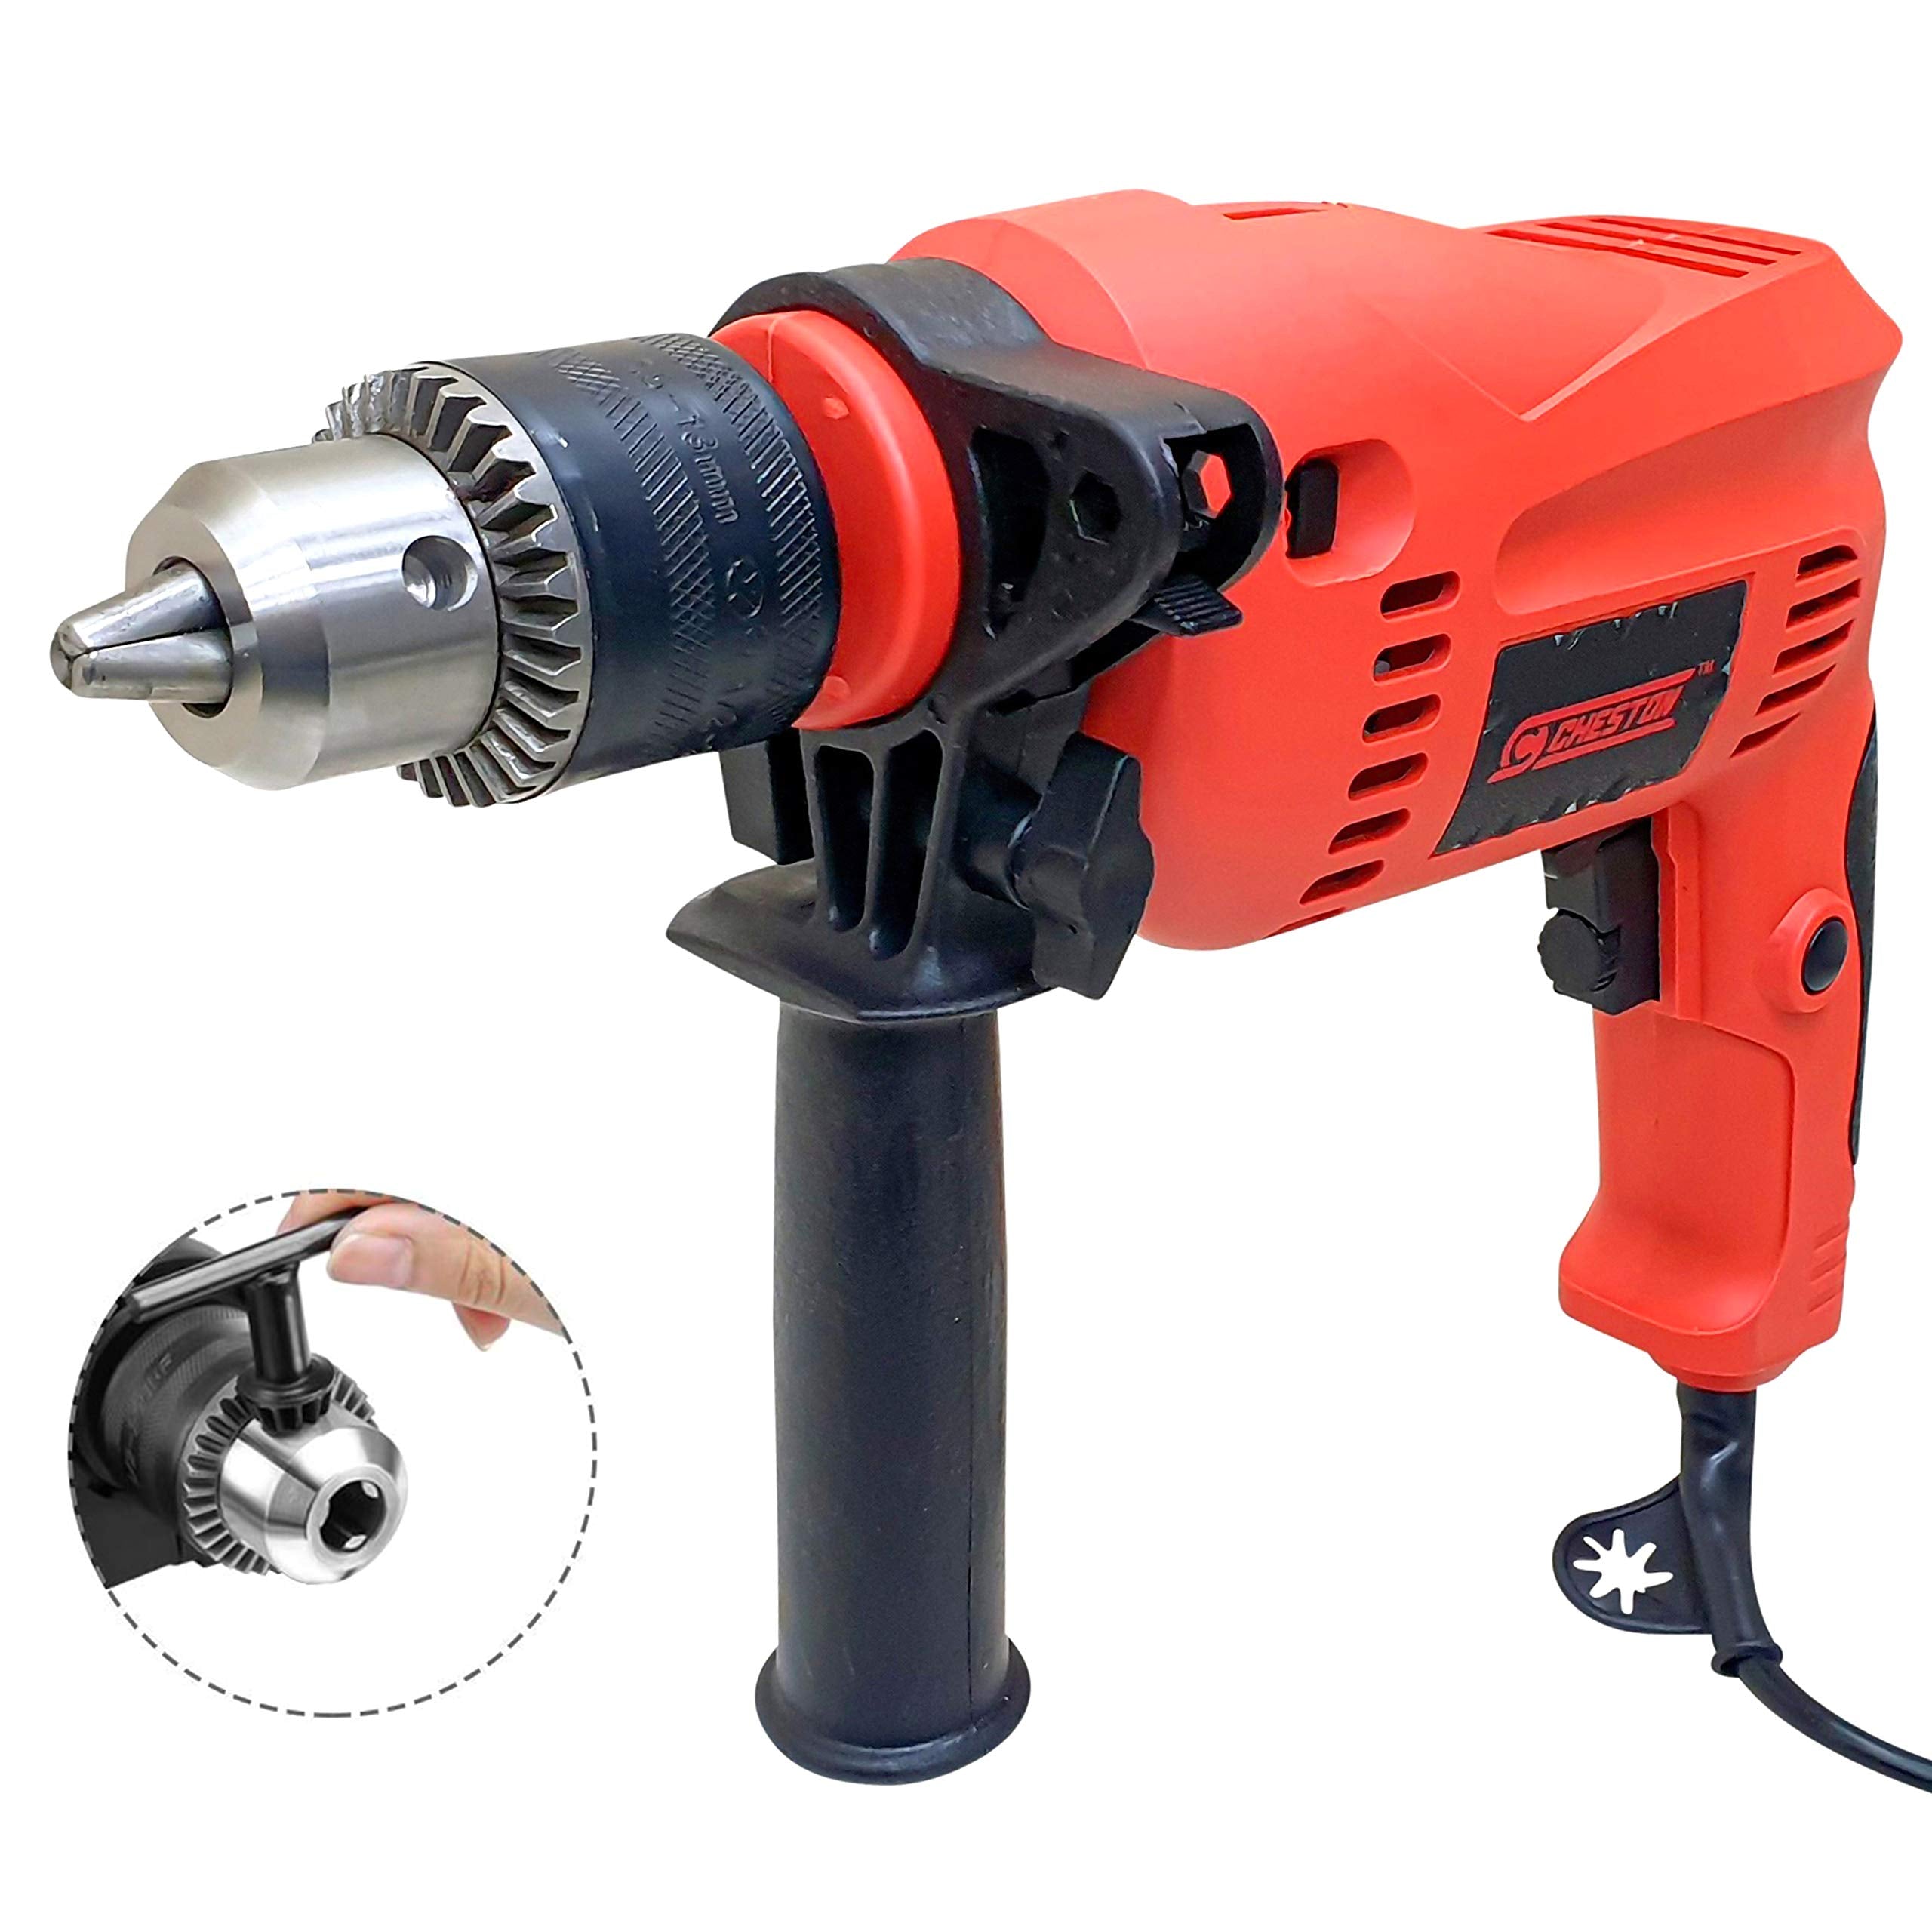 Cheston 13mm Impact Drill Machine Reversible Hammer Driver Variable Speed Screwdriver (Drill with BITS for Drilling)